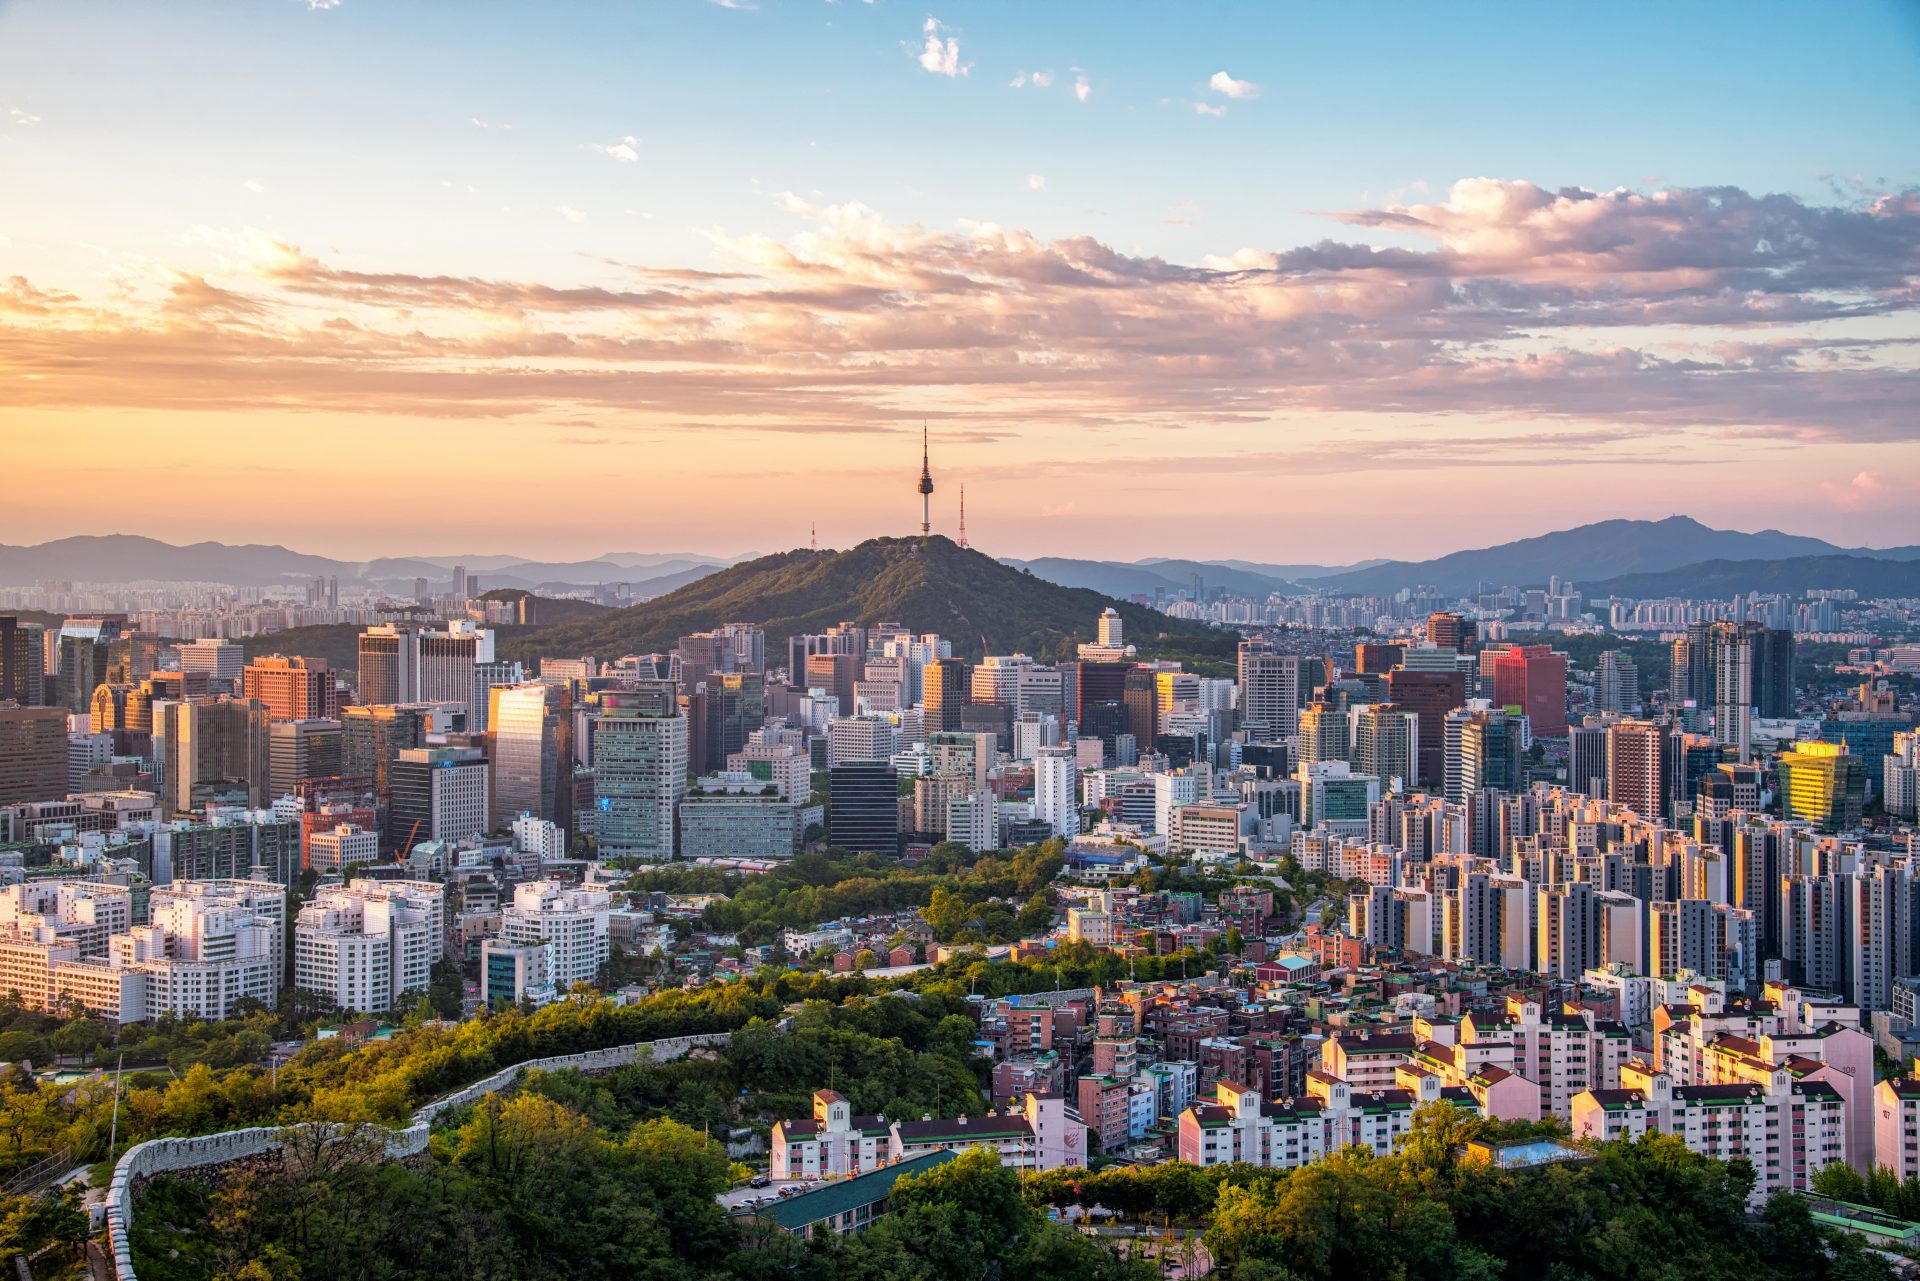 The pictures shows an aerial view of Seoul.